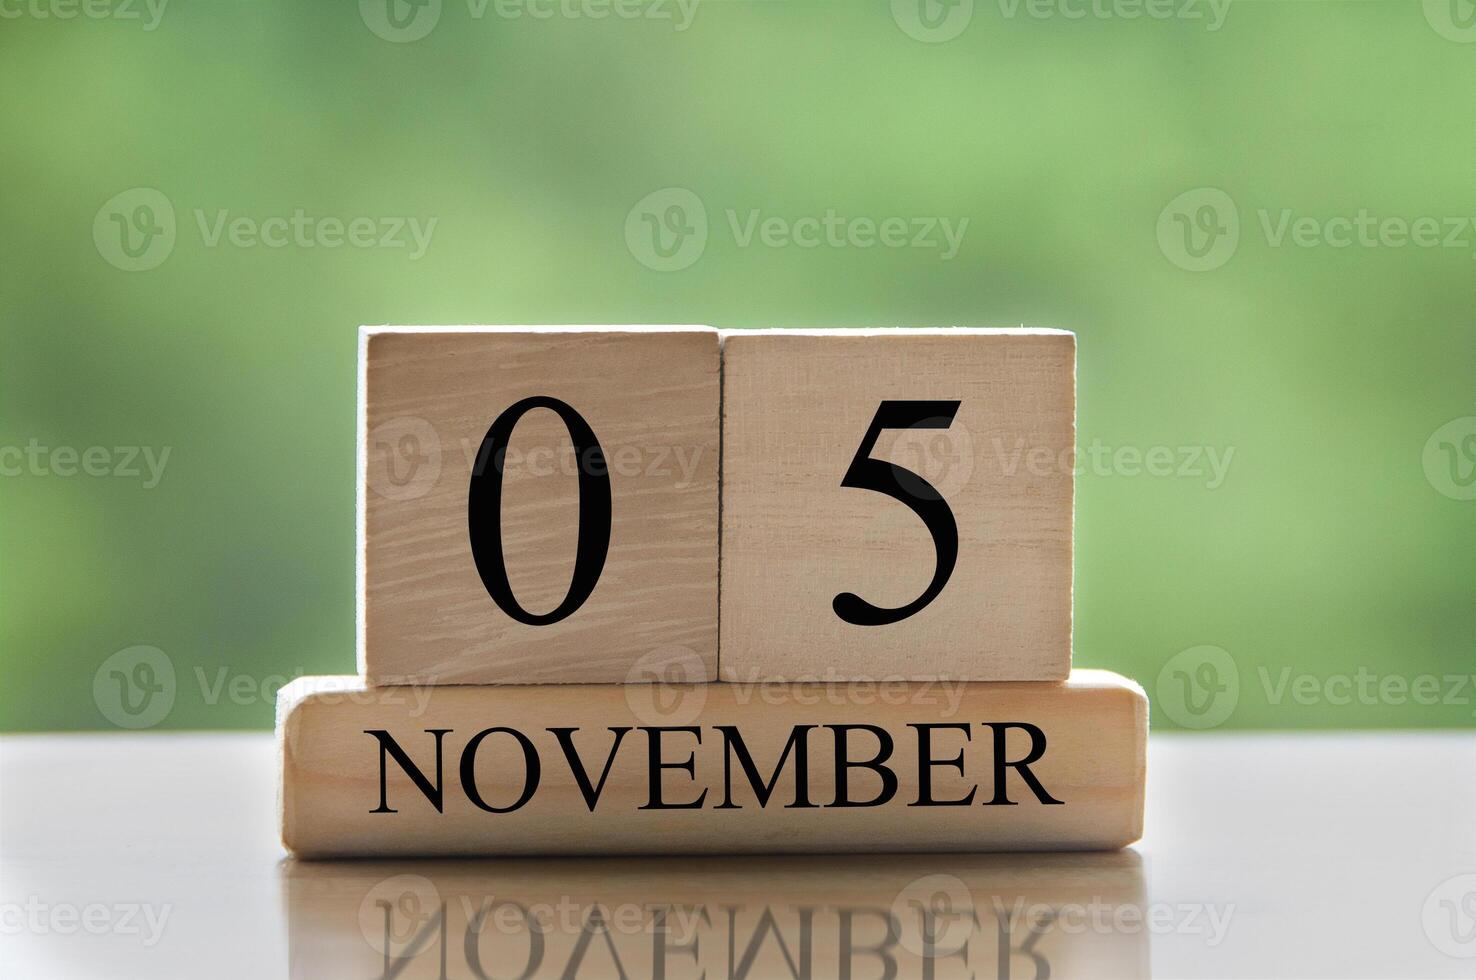 November 5 calendar date text on wooden blocks with copy space for ideas or text. Copy space photo